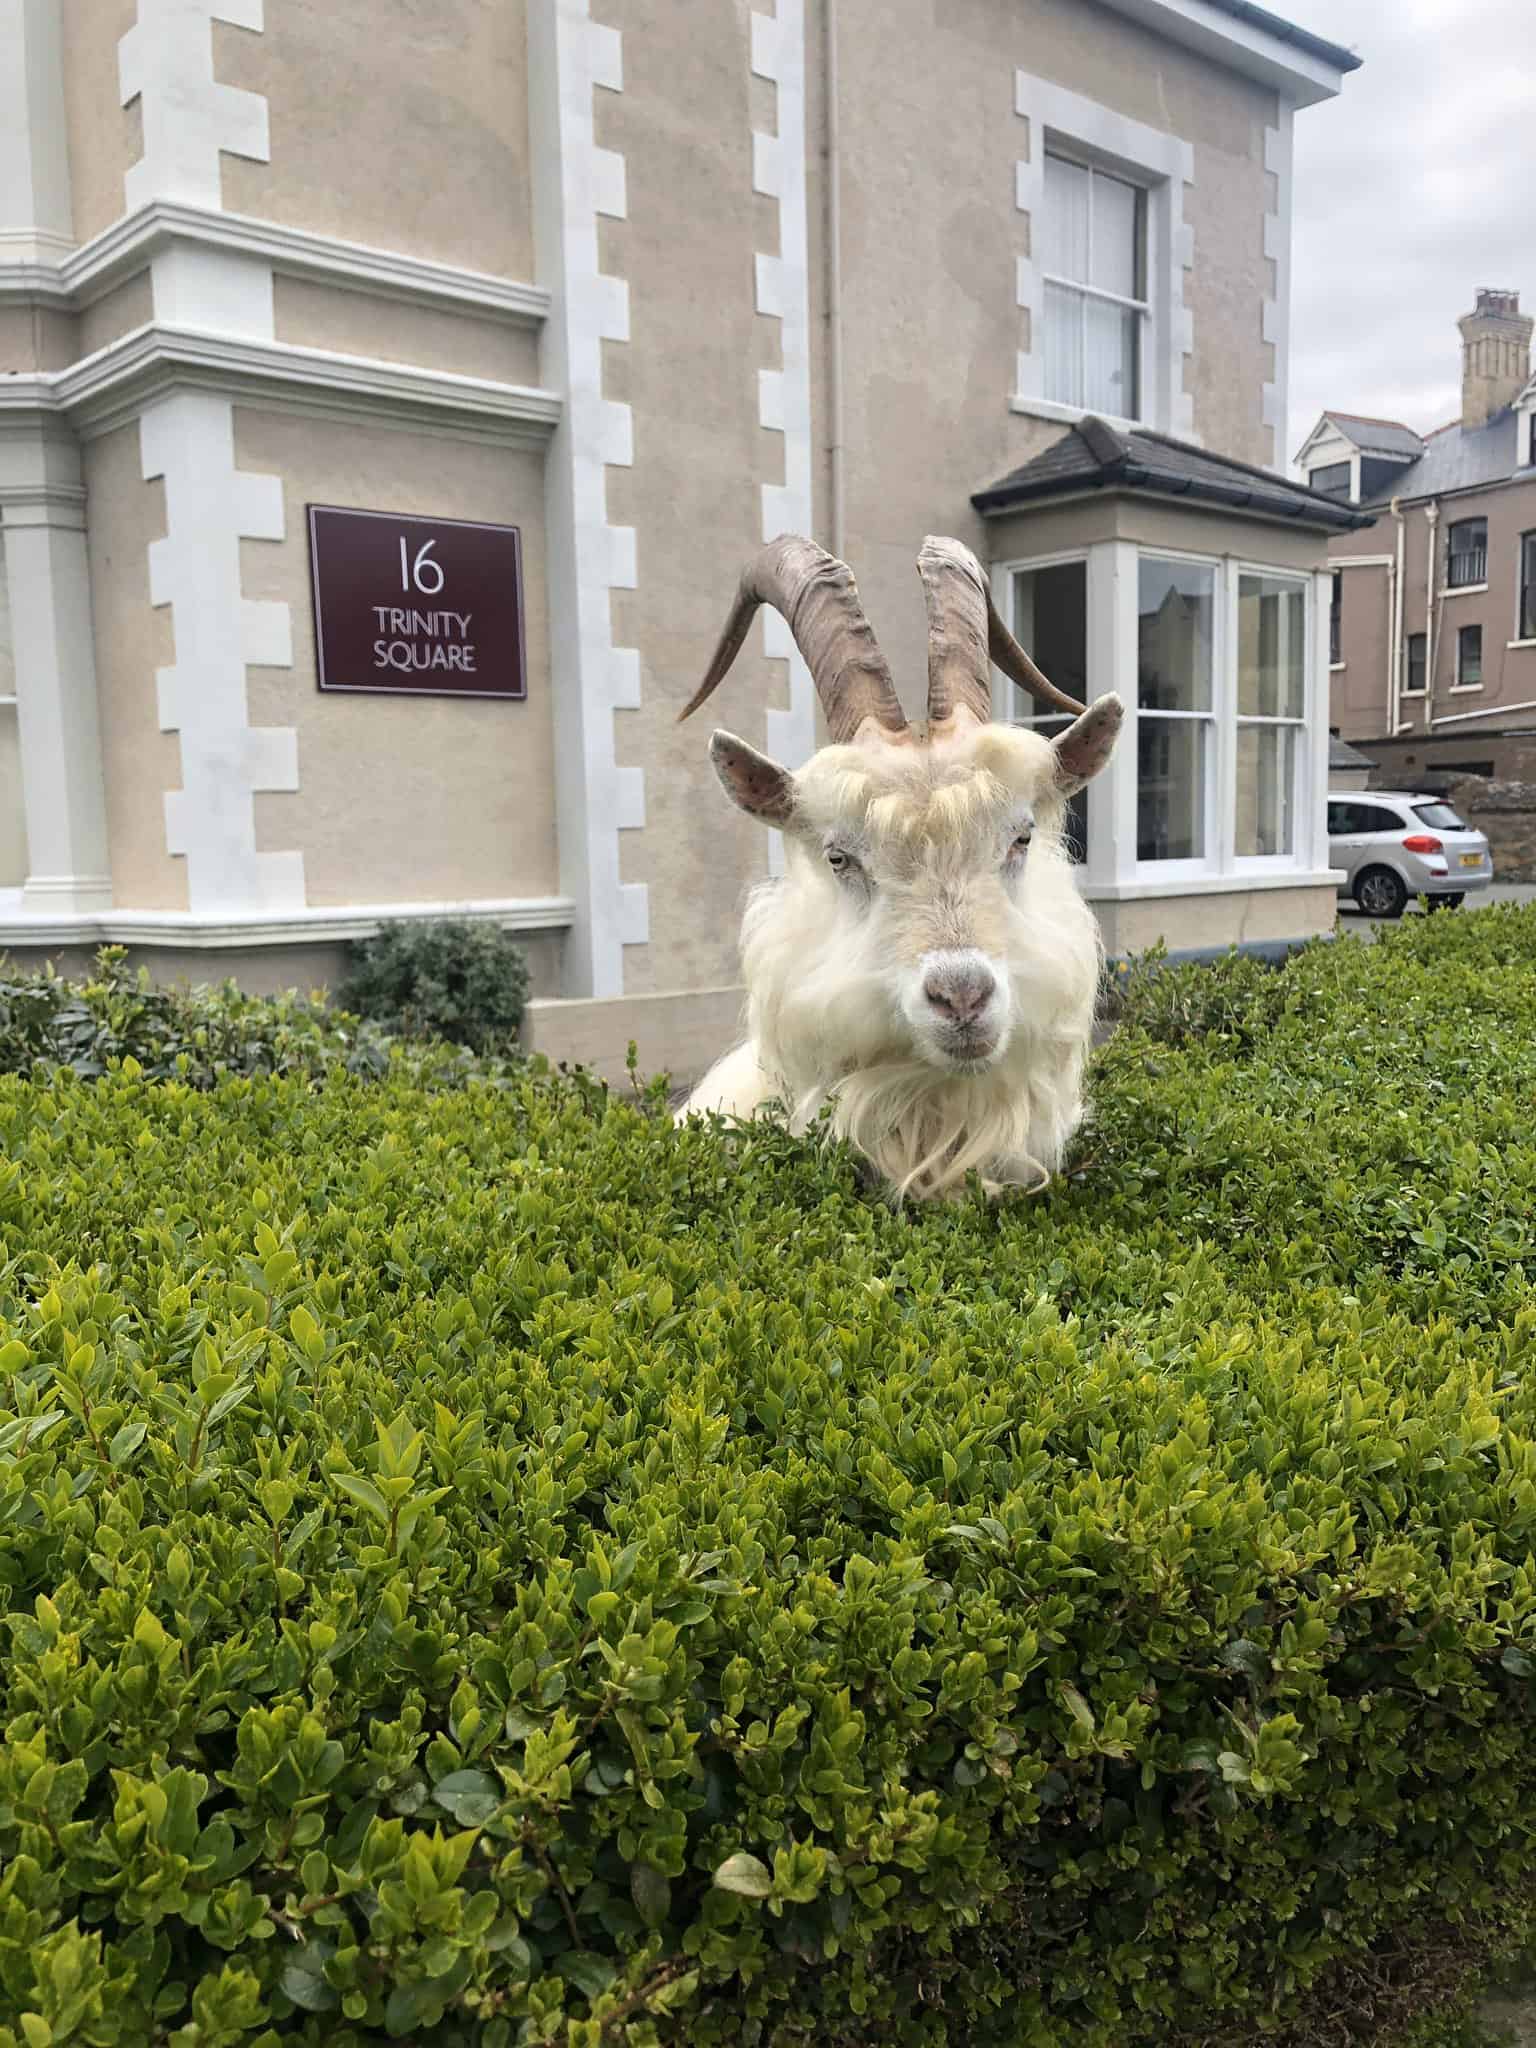 Mountain goats take over deserted streets in seaside town